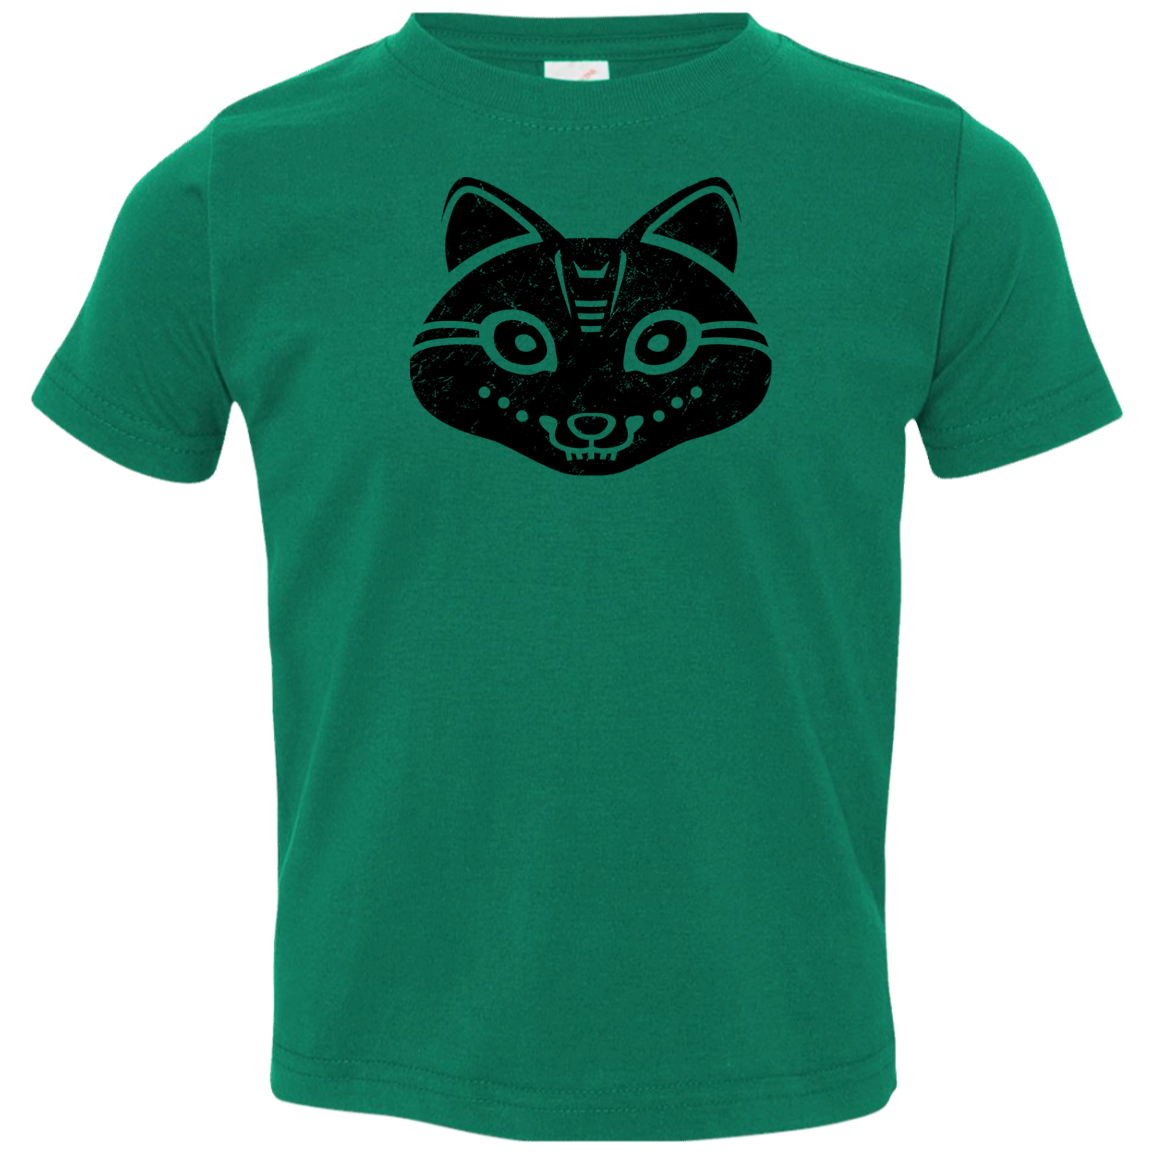 Black Distressed Emblem T-Shirt for Toddlers (Snow Fox/Snowp)